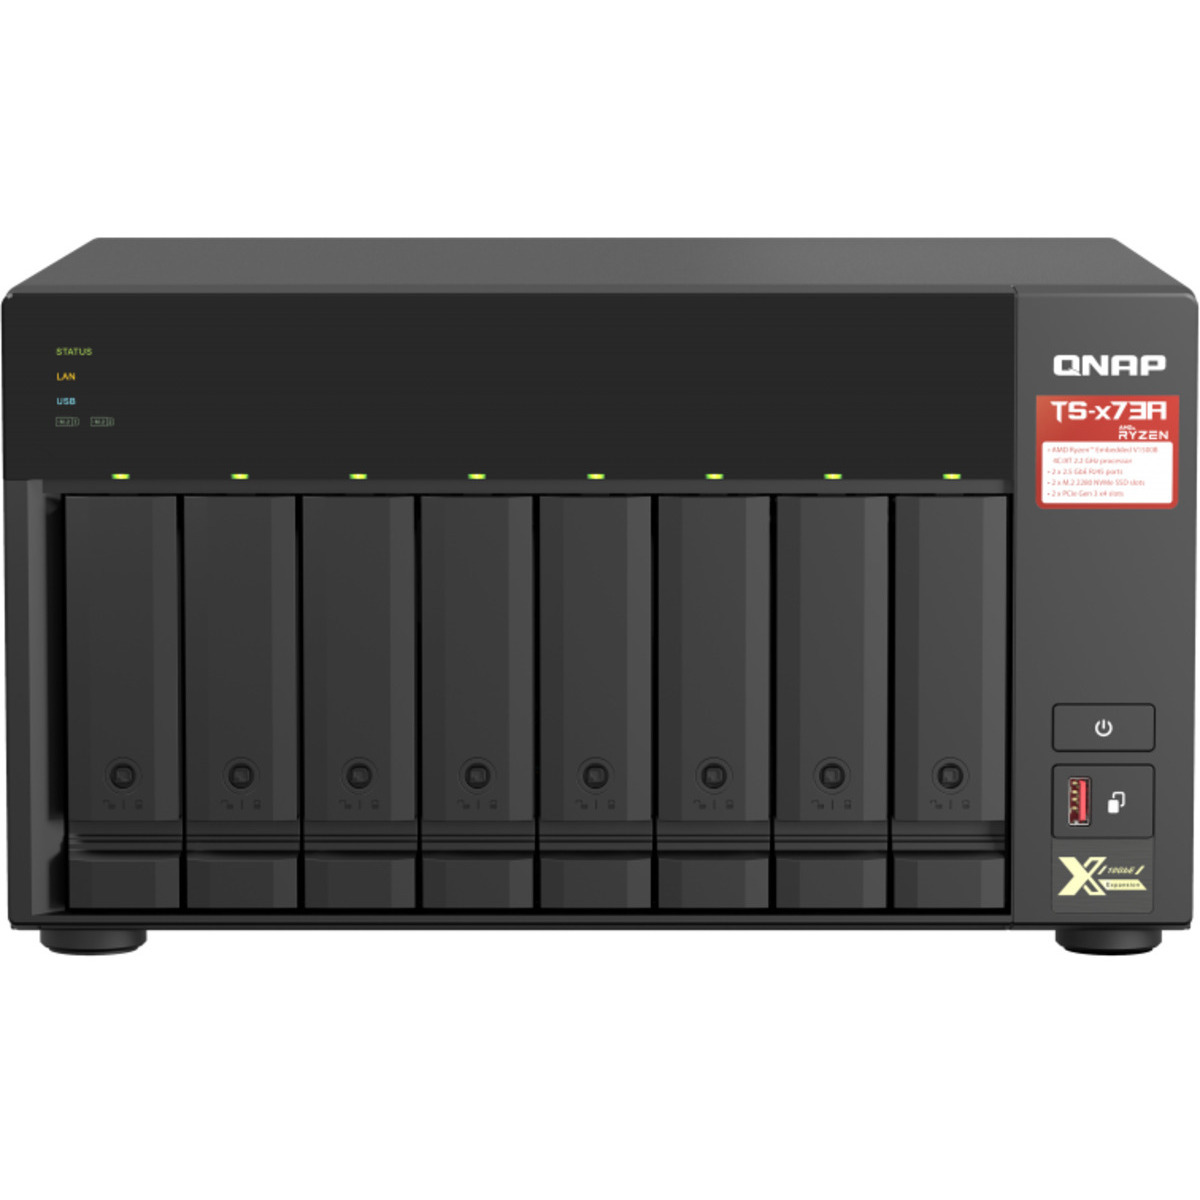 QNAP TS-873A 88tb 8-Bay Desktop Multimedia / Power User / Business NAS - Network Attached Storage Device 4x22tb Western Digital Ultrastar HC580 SED WUH722422ALE6L1 3.5 7200rpm SATA 6Gb/s HDD ENTERPRISE Class Drives Installed - Burn-In Tested TS-873A